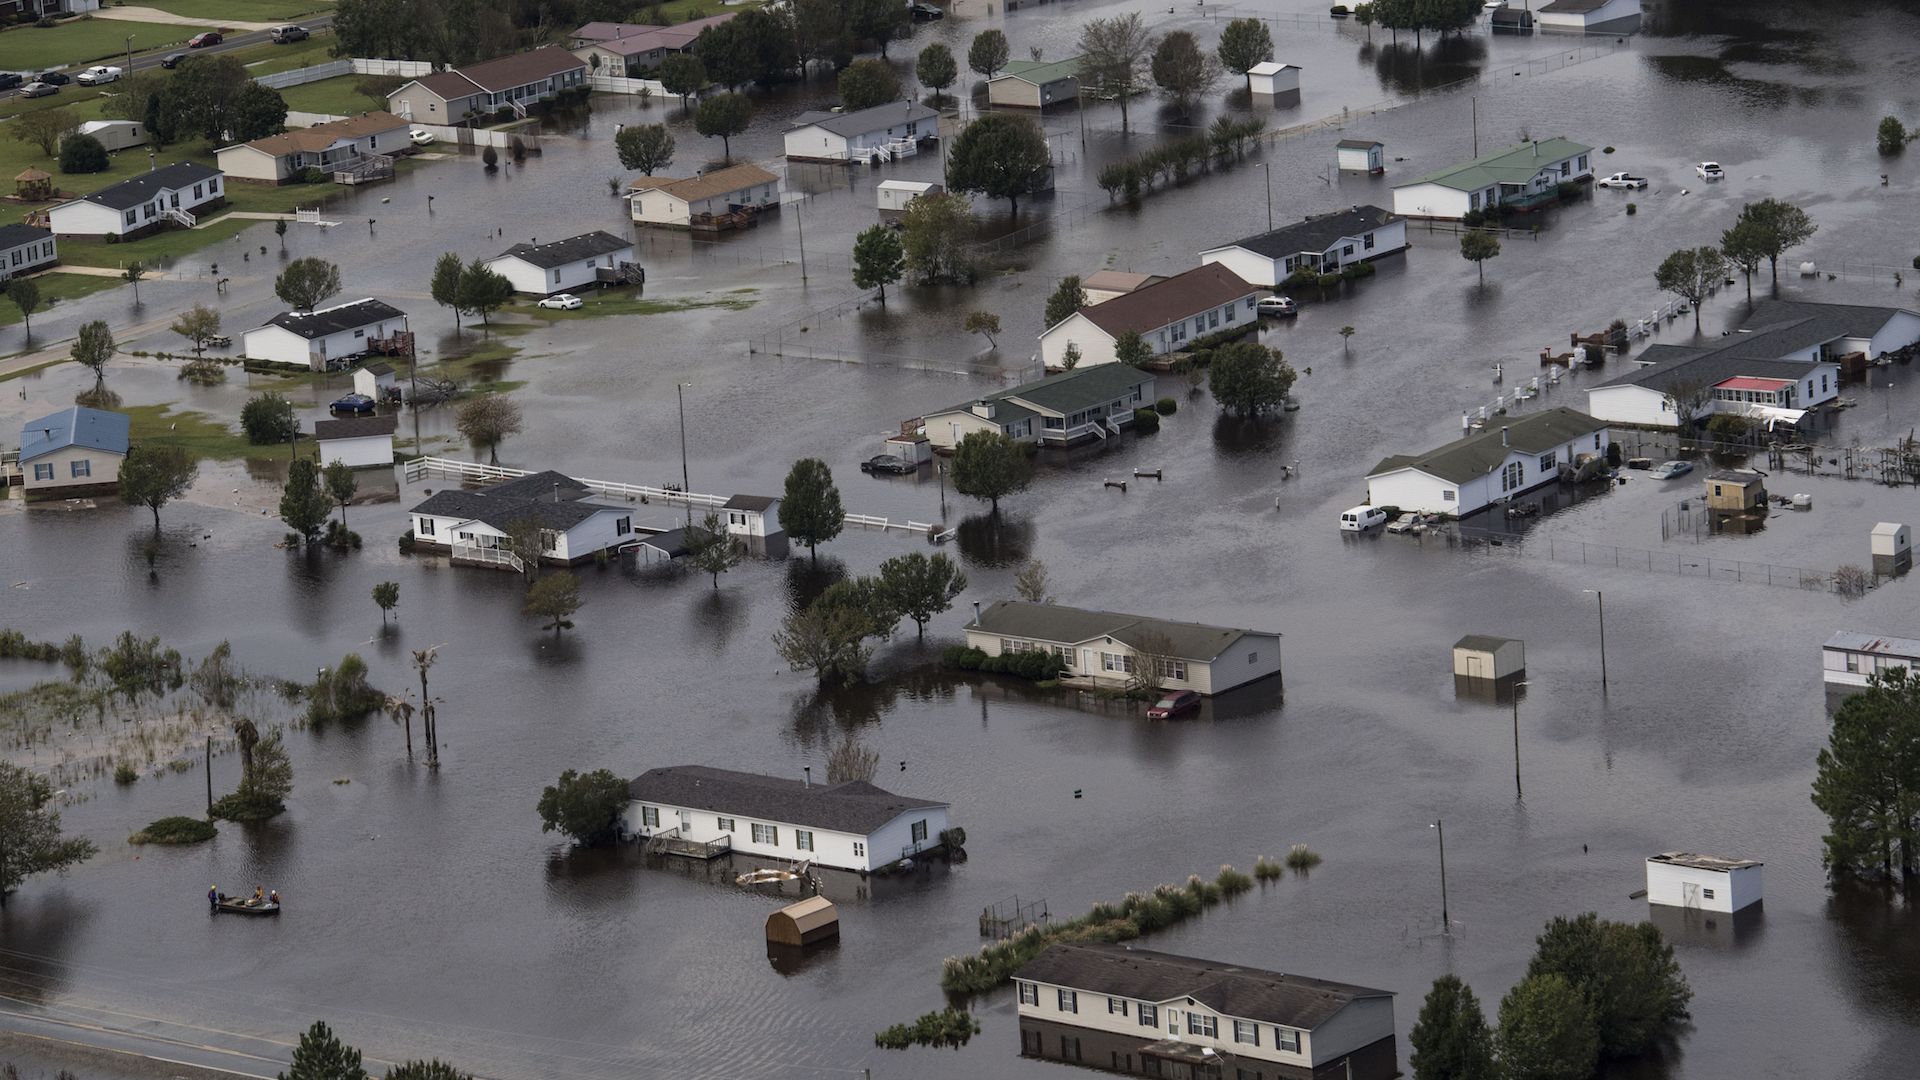 Flooding from Hurricane Florence is seen in Lumberton, NC on September 17, 2018.